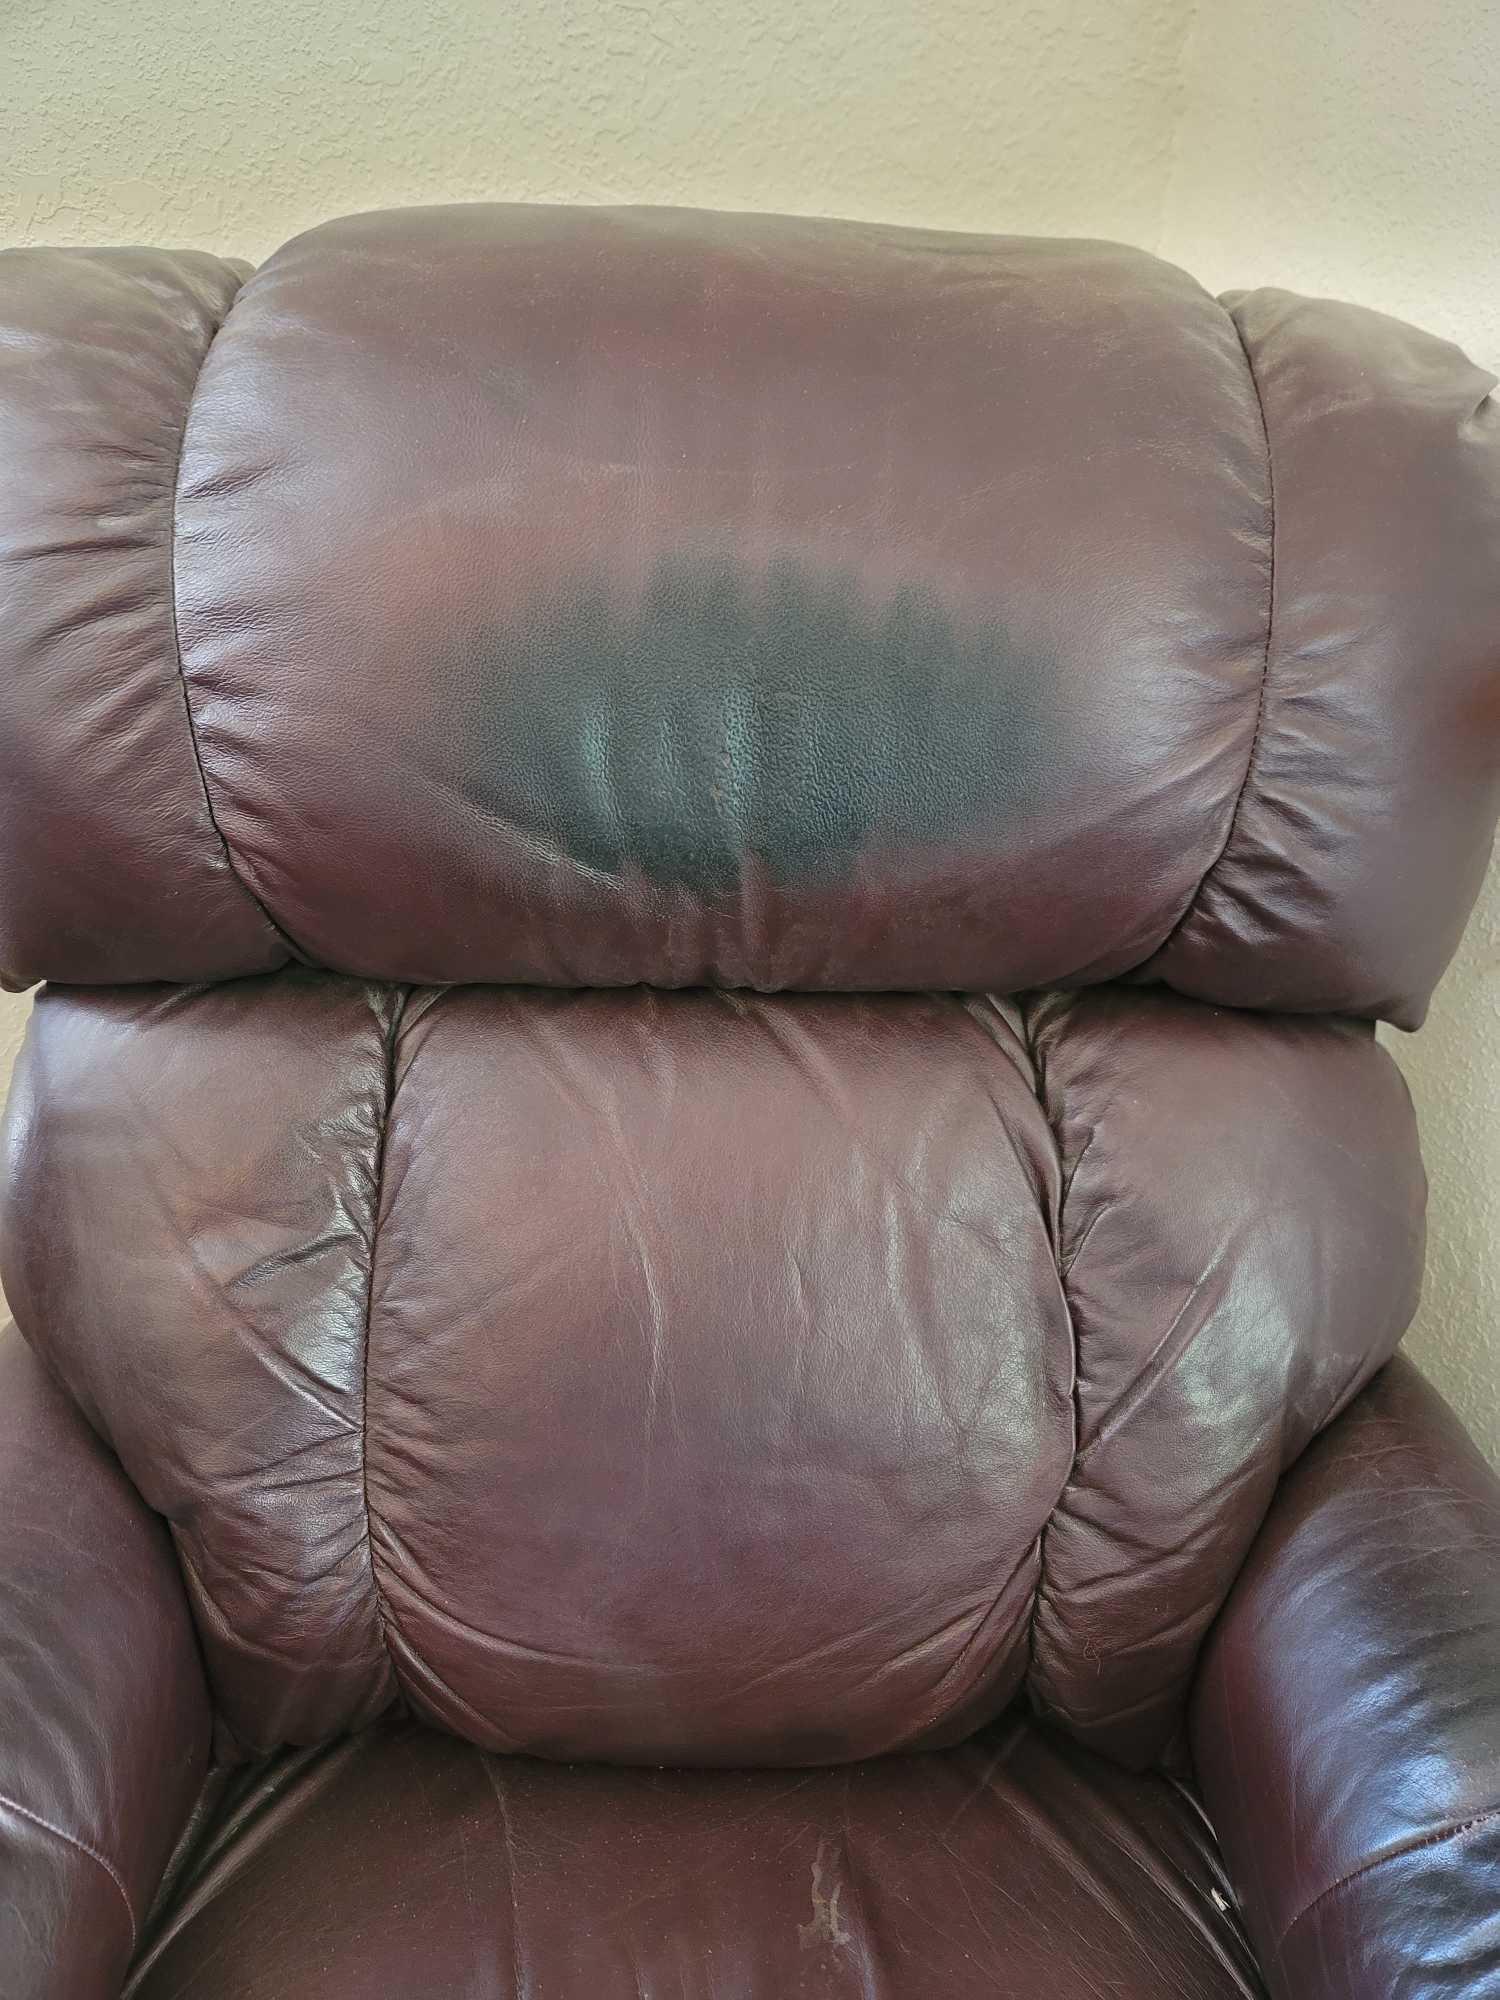 Lazy Boy Leather Recliner